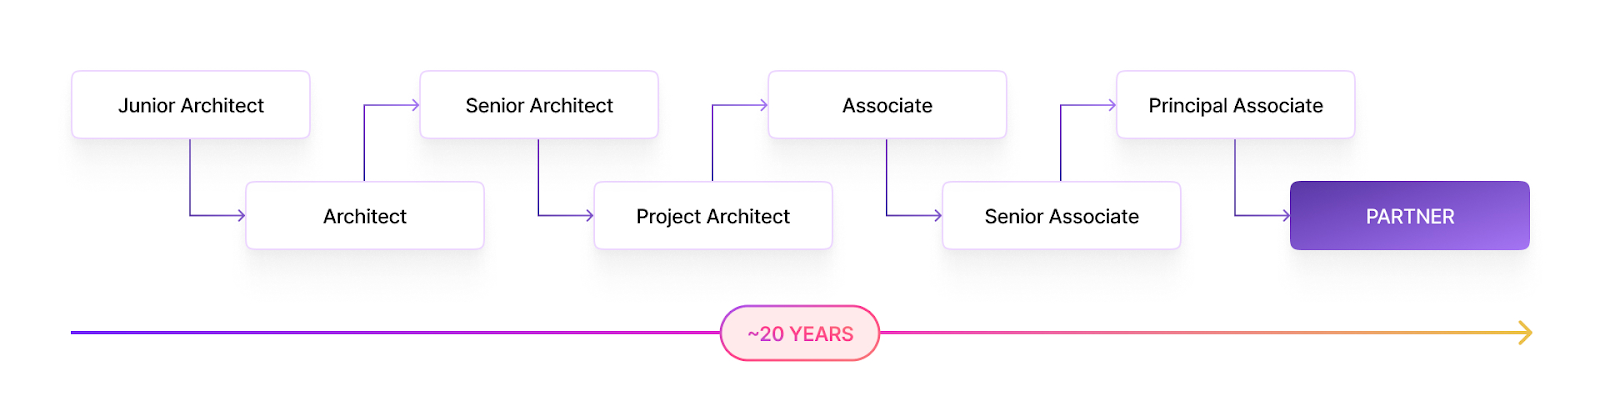 Career trajectory of a traditional architect